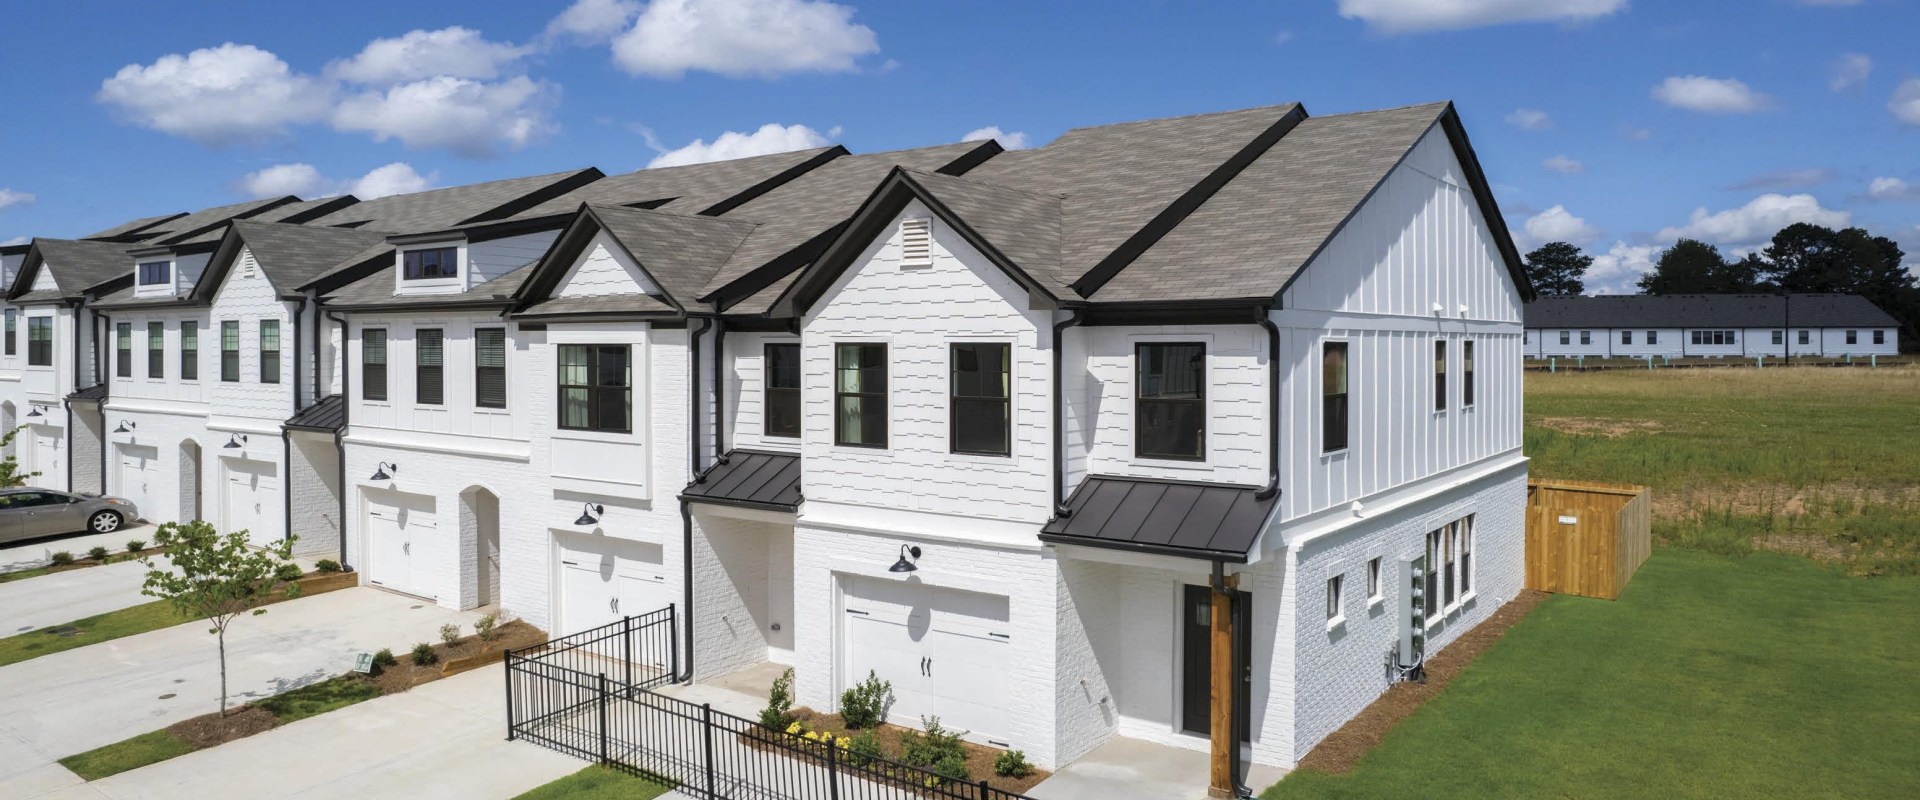 Investment Property In Hapeville: A Wise Choice For Long-Term Financial Growth